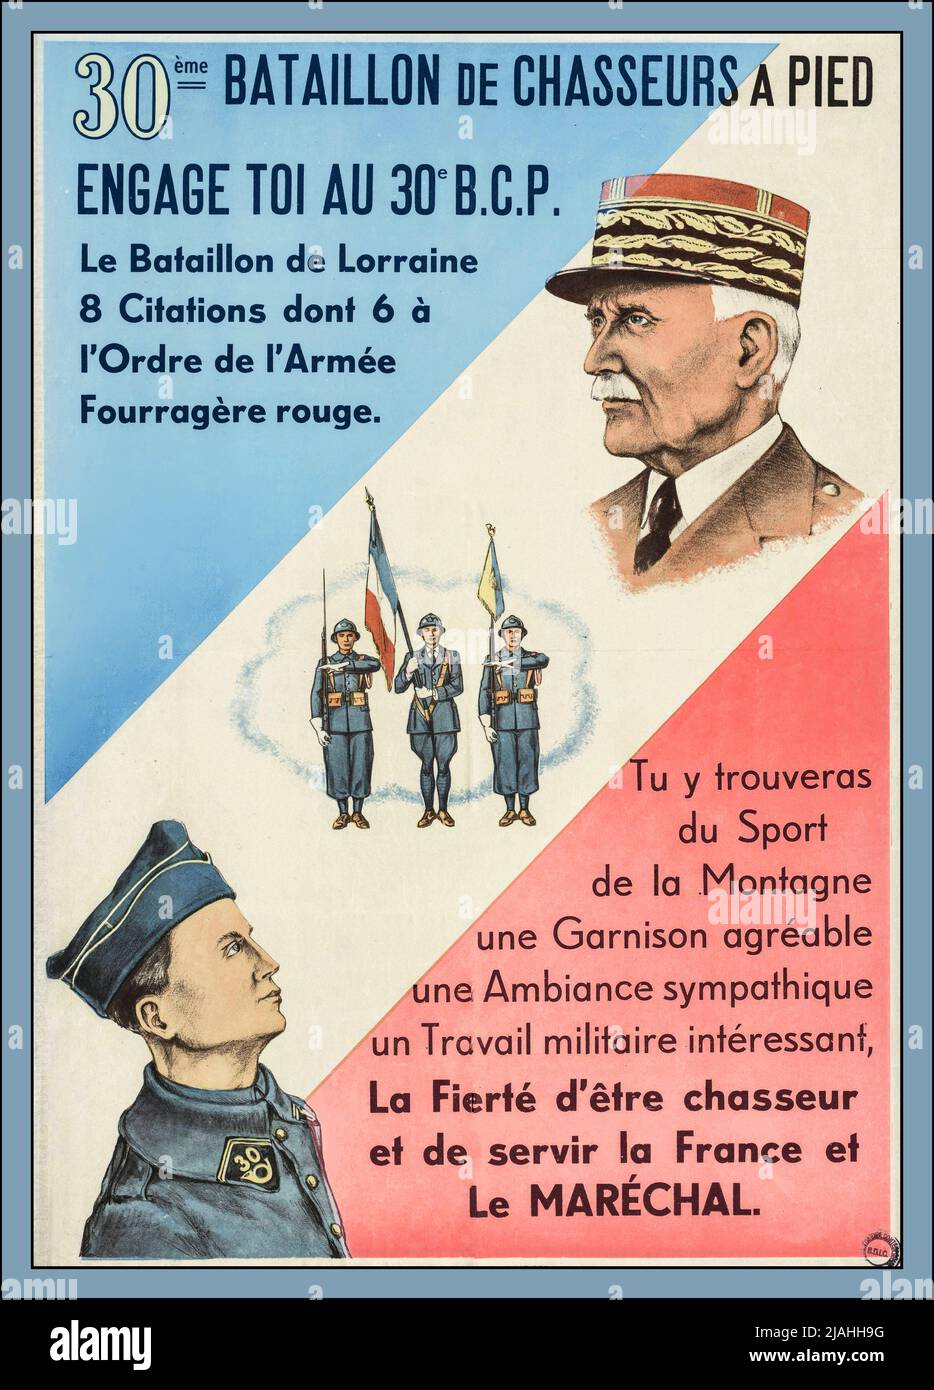 Vintage  WW2 Marshal Pétain (French: Maréchal Pétain)  Vichy France Recruitment Poster Vichy Army recruitment poster - 30th battalion of foot hunters, Pride in being hunters and serving France and Le Maréchal Petain WW2 World War II Stock Photo